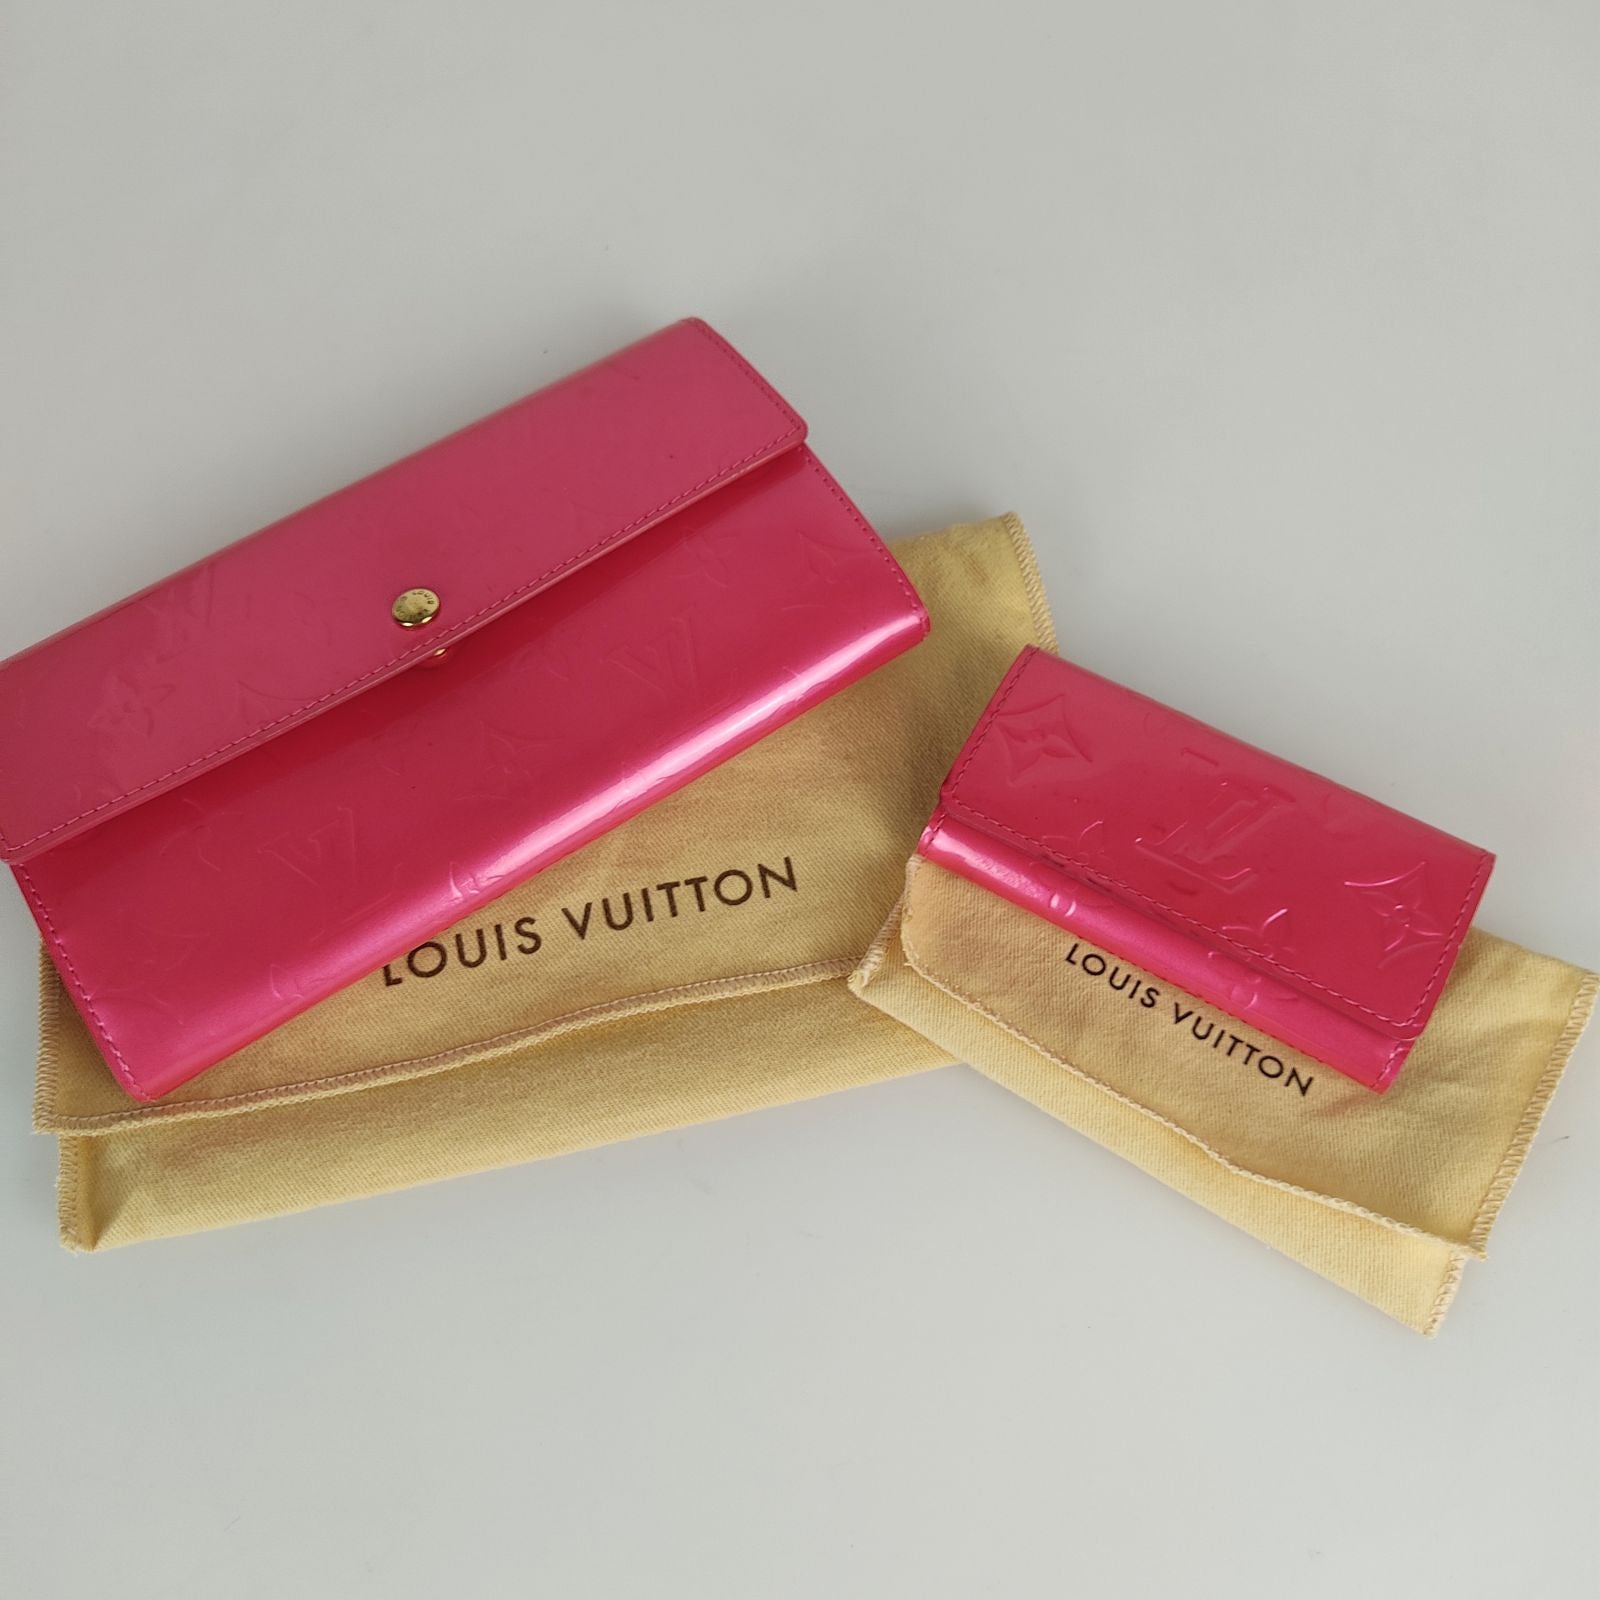 Louis Vuitton women's patent leather wallet and keychain set Pink